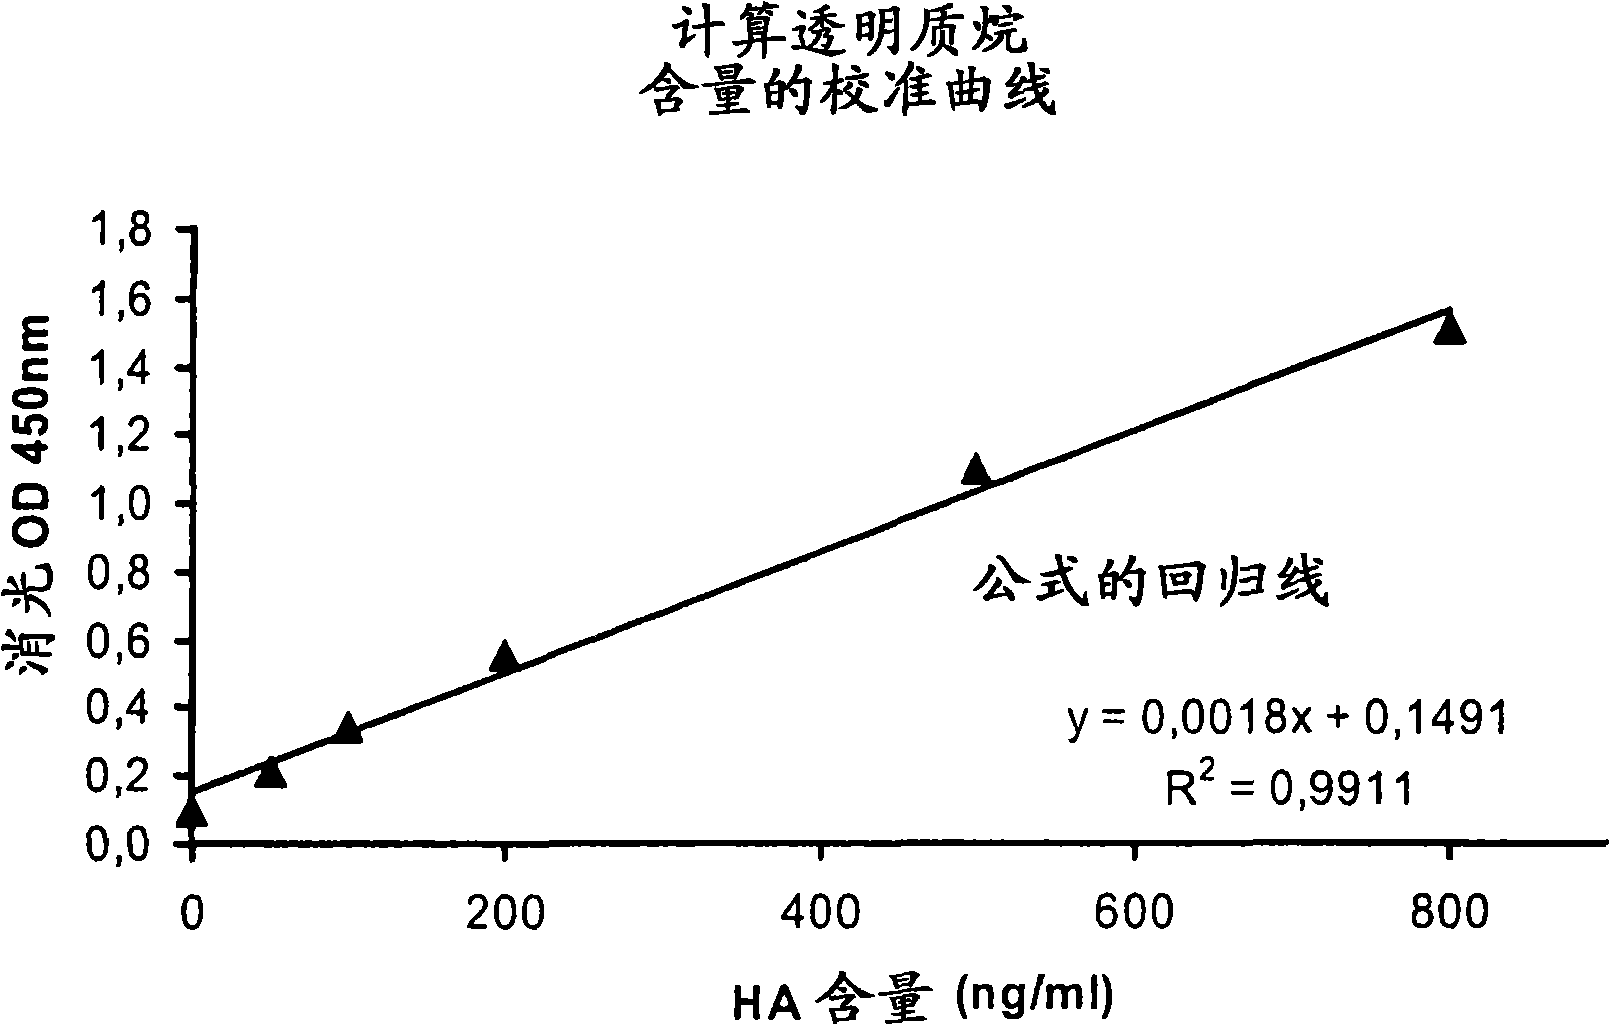 Plants with increased hyaluronan production